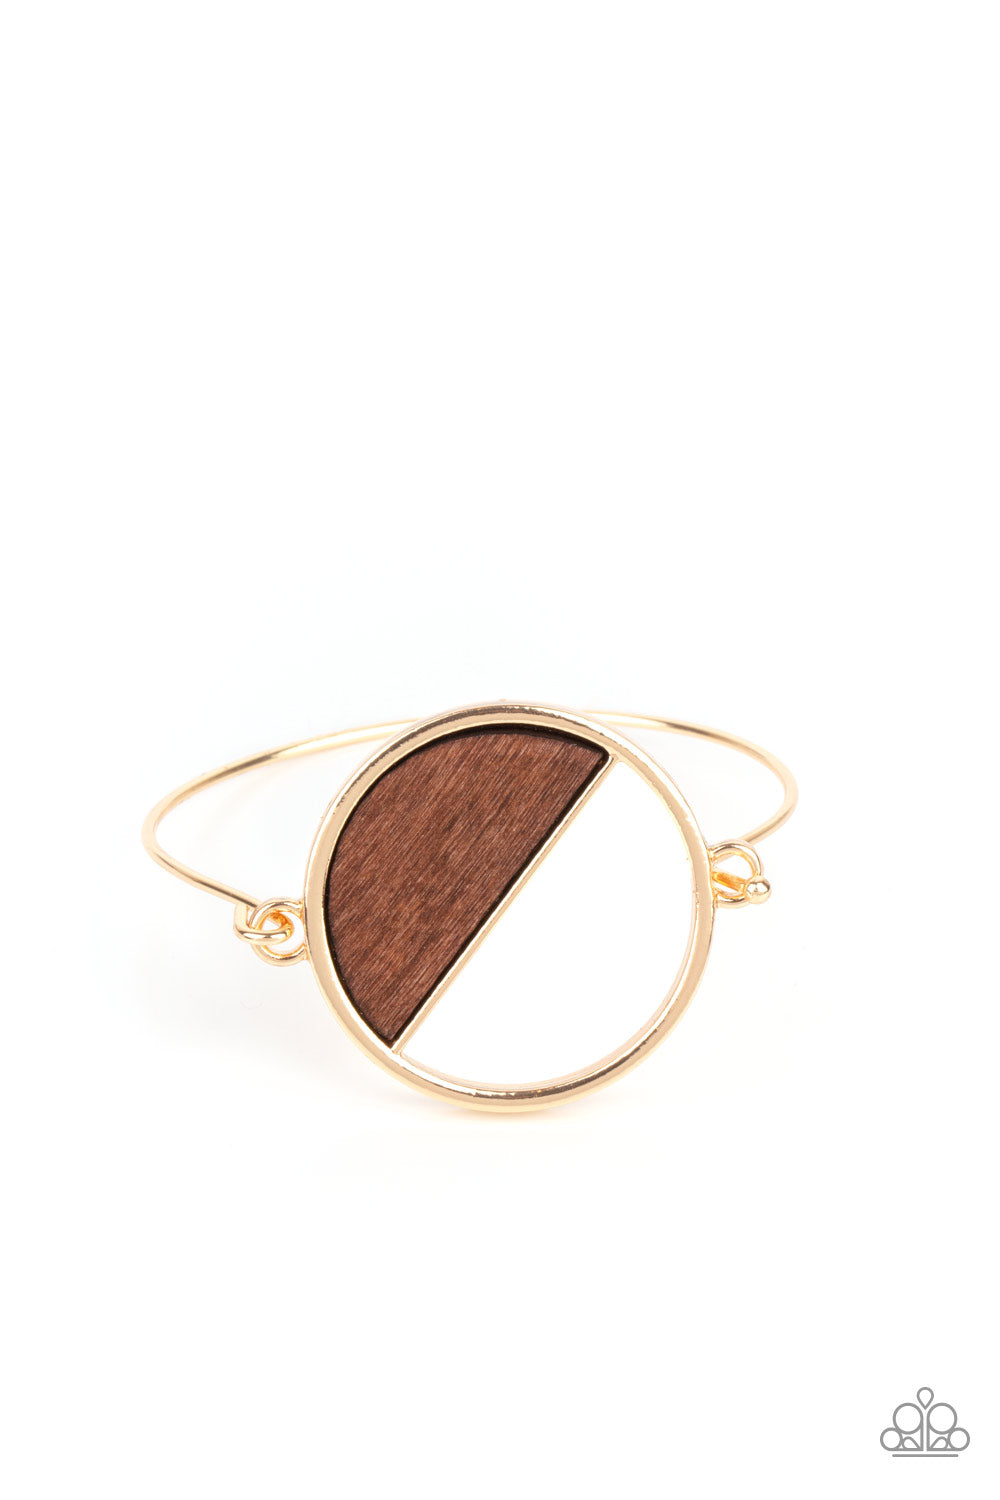 PRE-ORDER - Paparazzi Timber Trade - Gold - Bracelet - $5 Jewelry with Ashley Swint